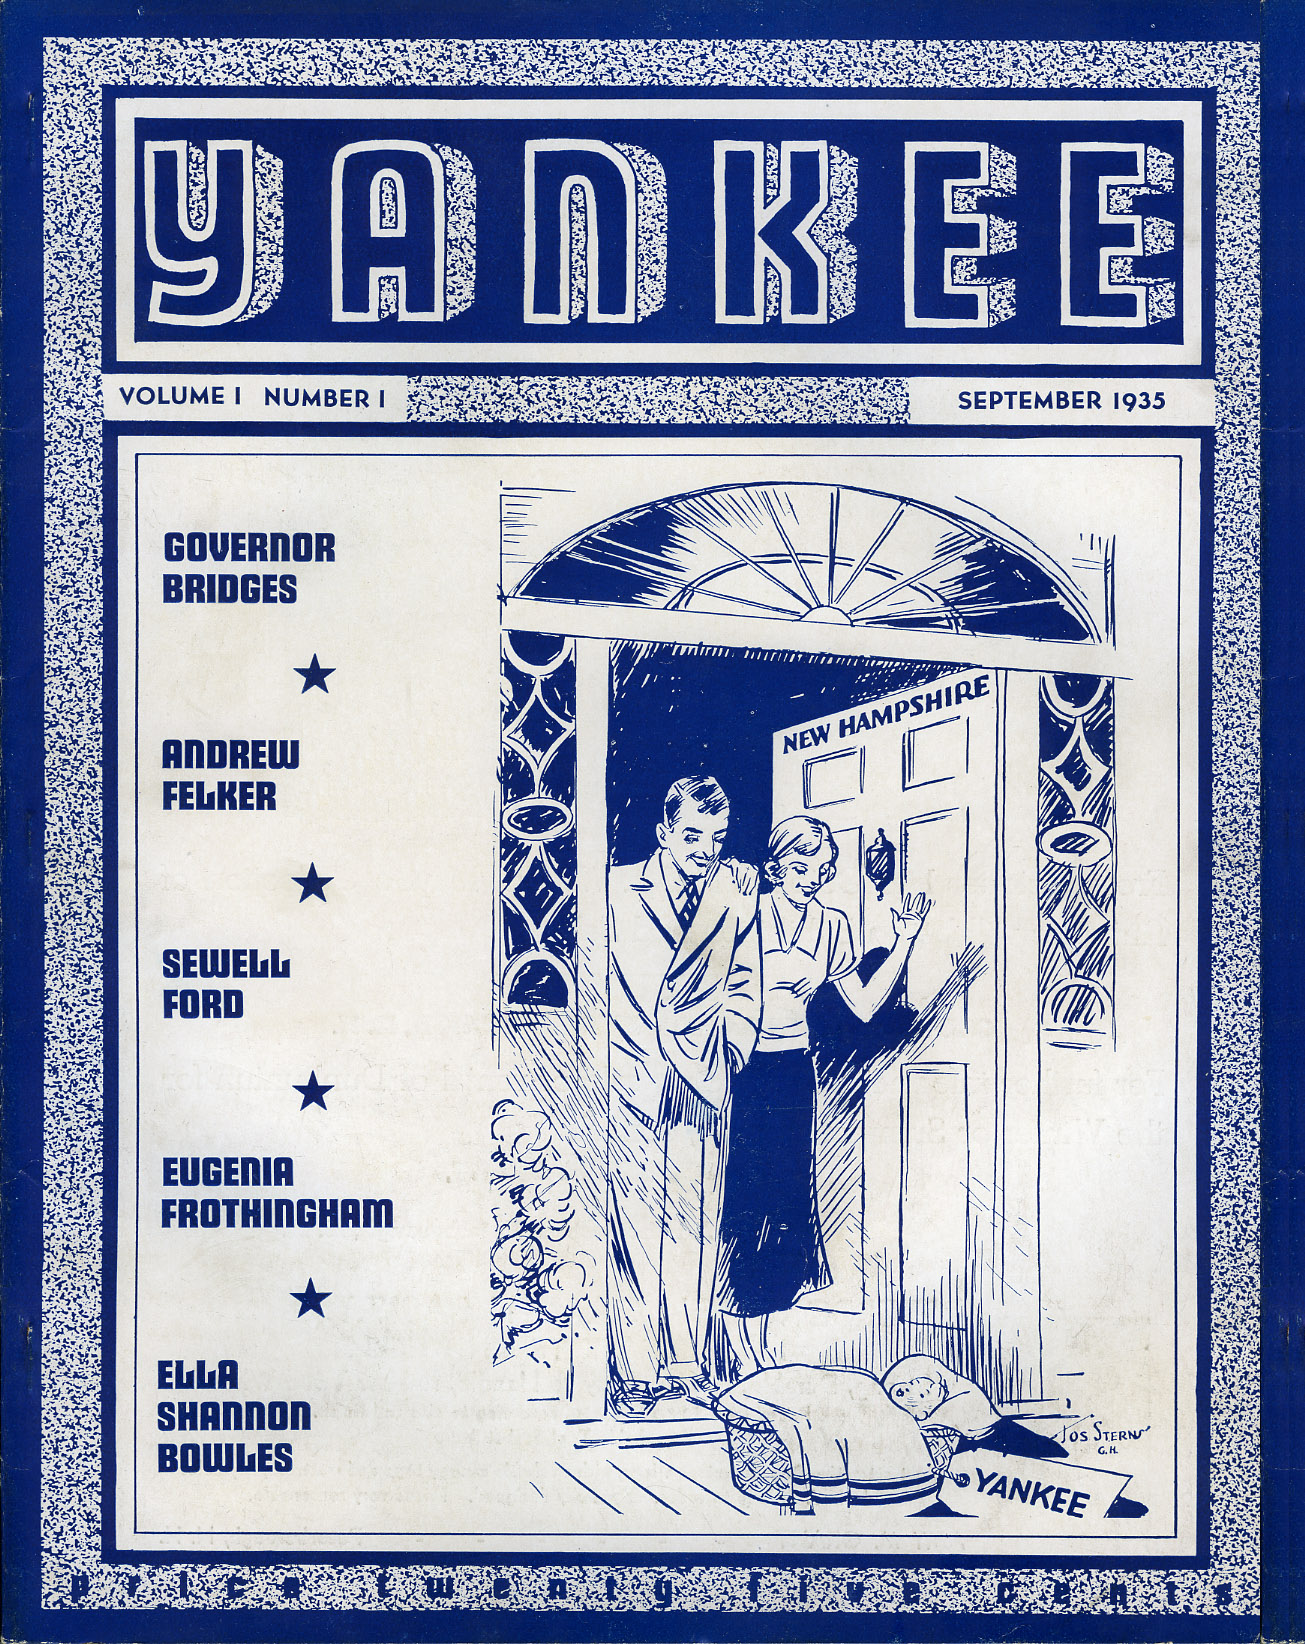 Depiction of First issue of Yankee Magazine